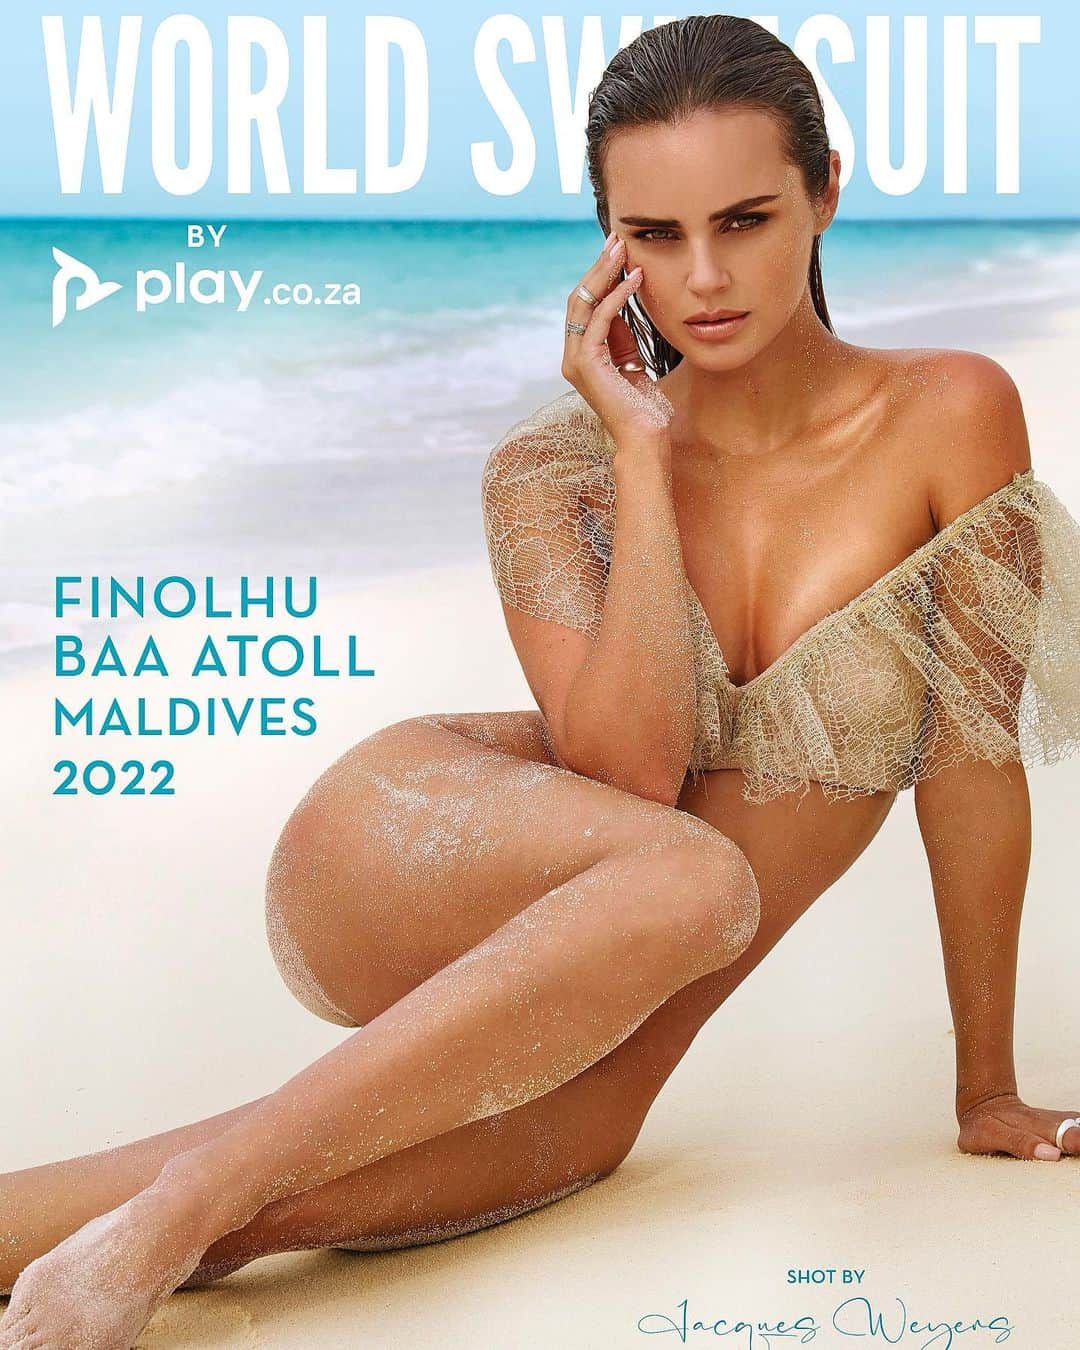 ゼニア・デリのインスタグラム：「English/Russian  I'm so proud of you Xenia. This year 2022 the cover of @worldswimsuit_com is yours. Probably one of the best covers you've ever done. So stately, so sensual, mature and of course beautiful. I will never stop admiring you. You are now 33, you have everything you dreamed of. You have a family, you have your small circle of constant friends, you have opportunities, and most importantly, you have yourself. I know, you work hard  on yourself, both mentally and physically. You are turning into an amazing person,that I never knew before. Keep going and don't stop. After all, there are so many more interesting and exciting things waiting for you. @play.coza @jacquesweyers.studio @malakelezzawy @finolhu_maldives  Я так горжусь тобой,Ксения. Обложка 2022 году @worldswimsuit_com твоя. Наверное, одна из лучших обложек,которую ты делала.Такая статная,такая чувственная,взрослая ну и конечно красивая.Никогда не перестану восхищаться тобой.Тебе сейчас 33, у тебя есть все о чем ты мечтала.У тебя есть семья,у тебя есть твой маленький круг неизменных друзей, у тебя есть возможности,а самое главное у тебя есть ты сама.Я знаю,ты много трудишься  над собой как в ментальном, так и физическом плане.Ты превращаешься в удивительного человека, которого я раньше и не знала.Продолжай идти и не останавливайся. Ведь тебя ждёт еще столько всего интересного и увлекательного.」